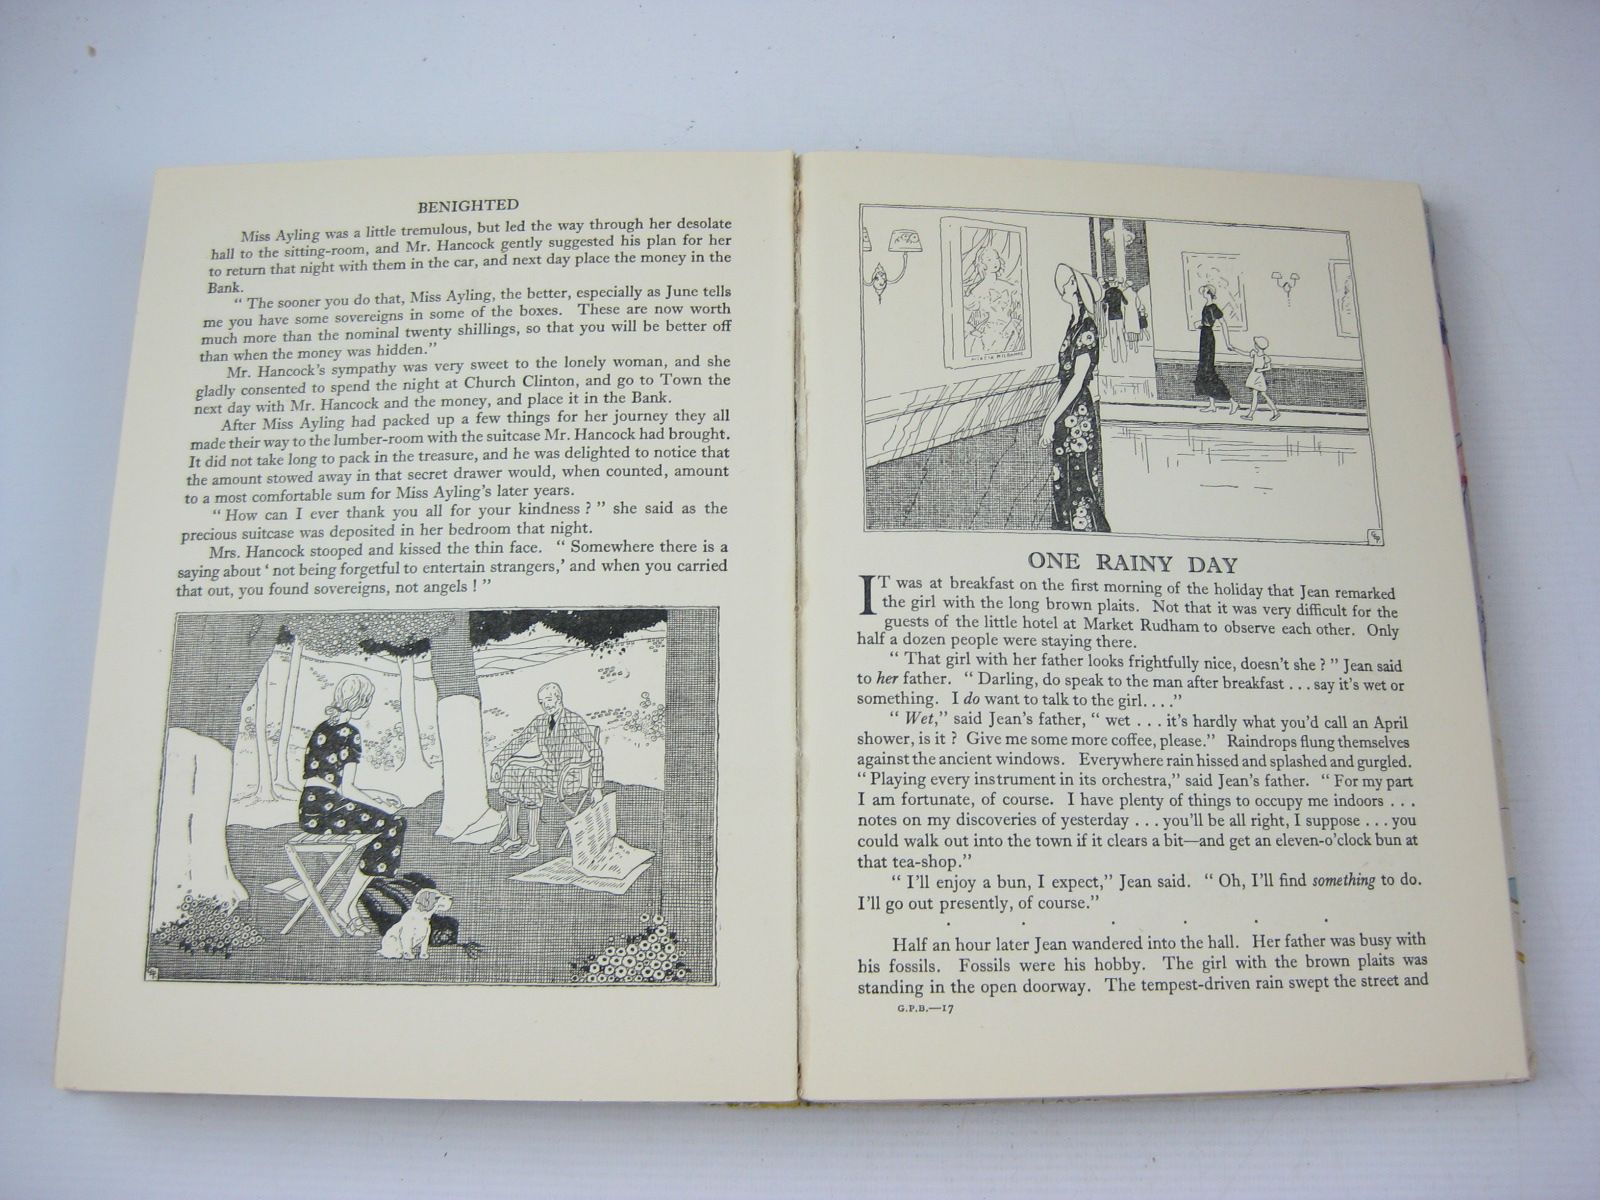 Photo of SUNSHINE TALES illustrated by Peto, Gladys published by John F. Shaw & Co Ltd. (STOCK CODE: 1314308)  for sale by Stella & Rose's Books